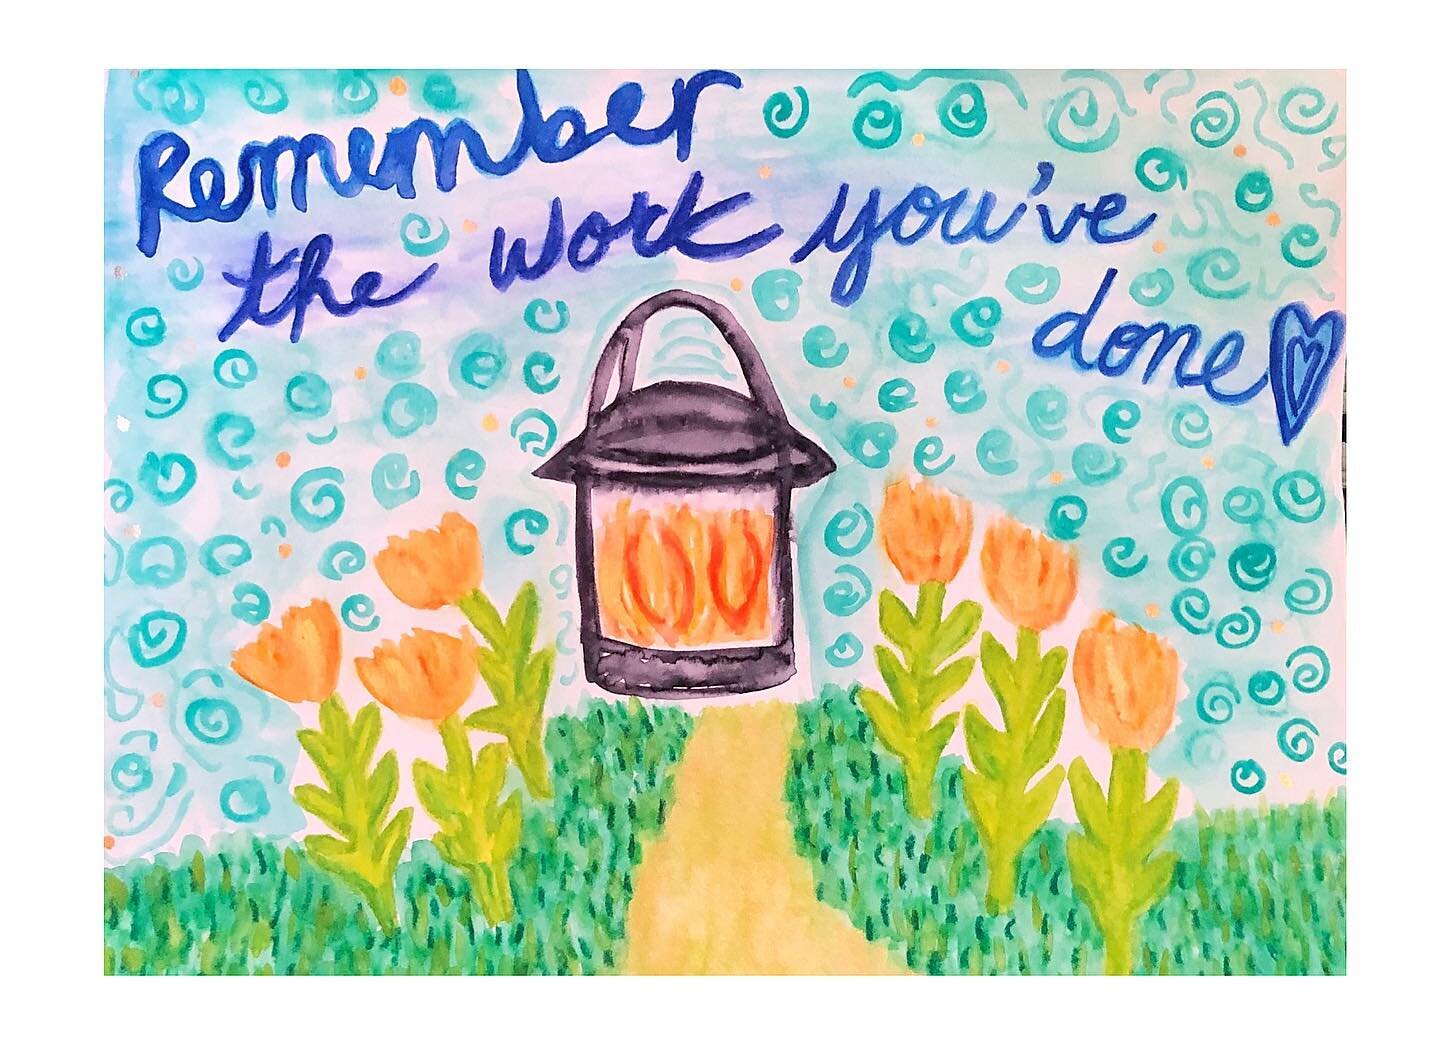 &ldquo;Remember the work you&rsquo;ve done&rdquo; 🪔 ✨🌻 this image and phrase seems appropriate this time of year, especially in 2020. Sometimes our work isn&rsquo;t visible or tangible. Yet, it&rsquo;s still happening. We are all always in a proces